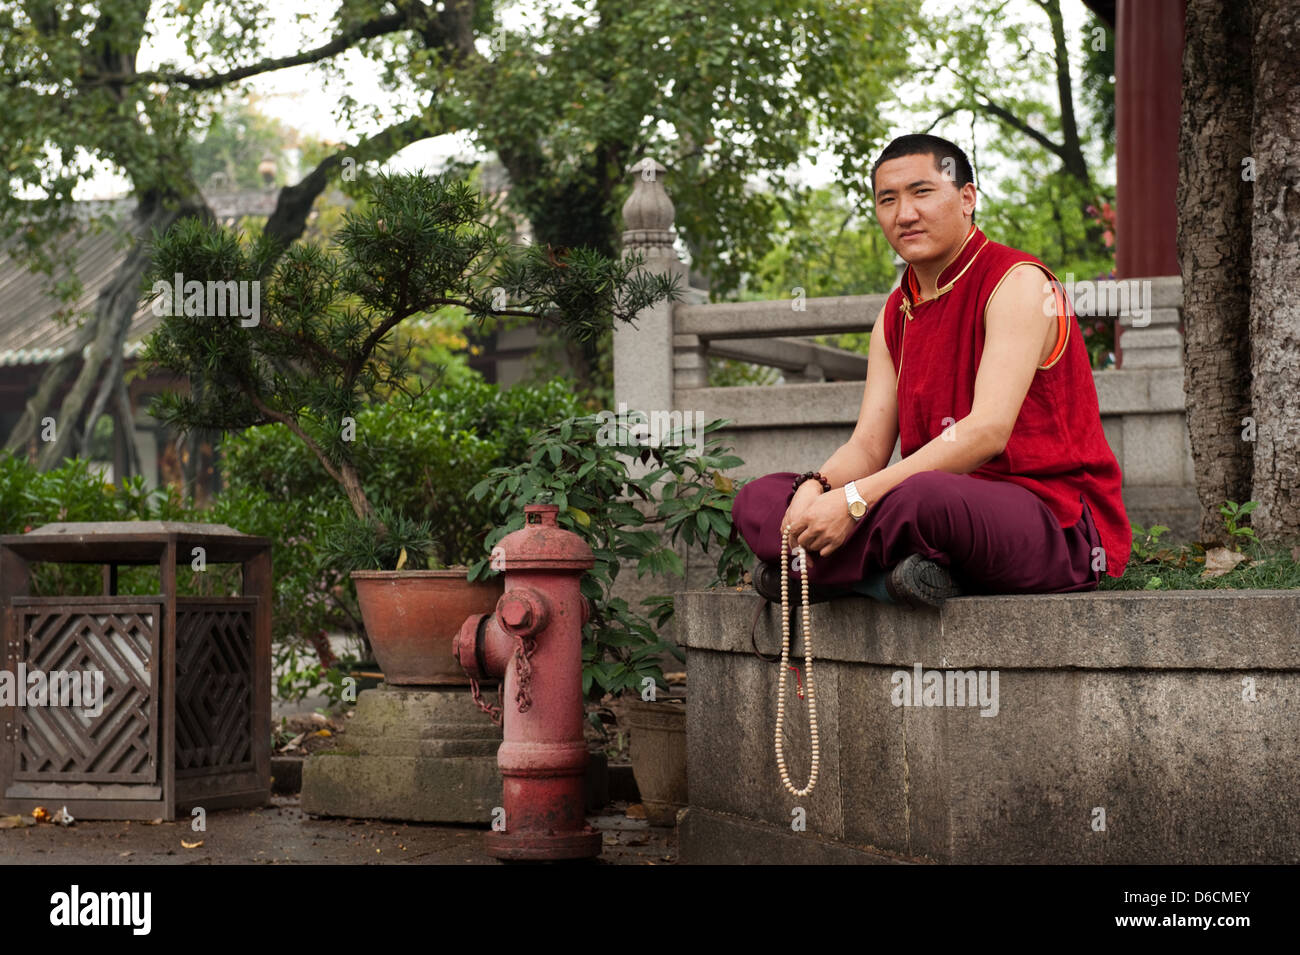 Guangzhou, China, a monk sitting under a tree in the courtyard of Filial Piety Temple Stock Photo